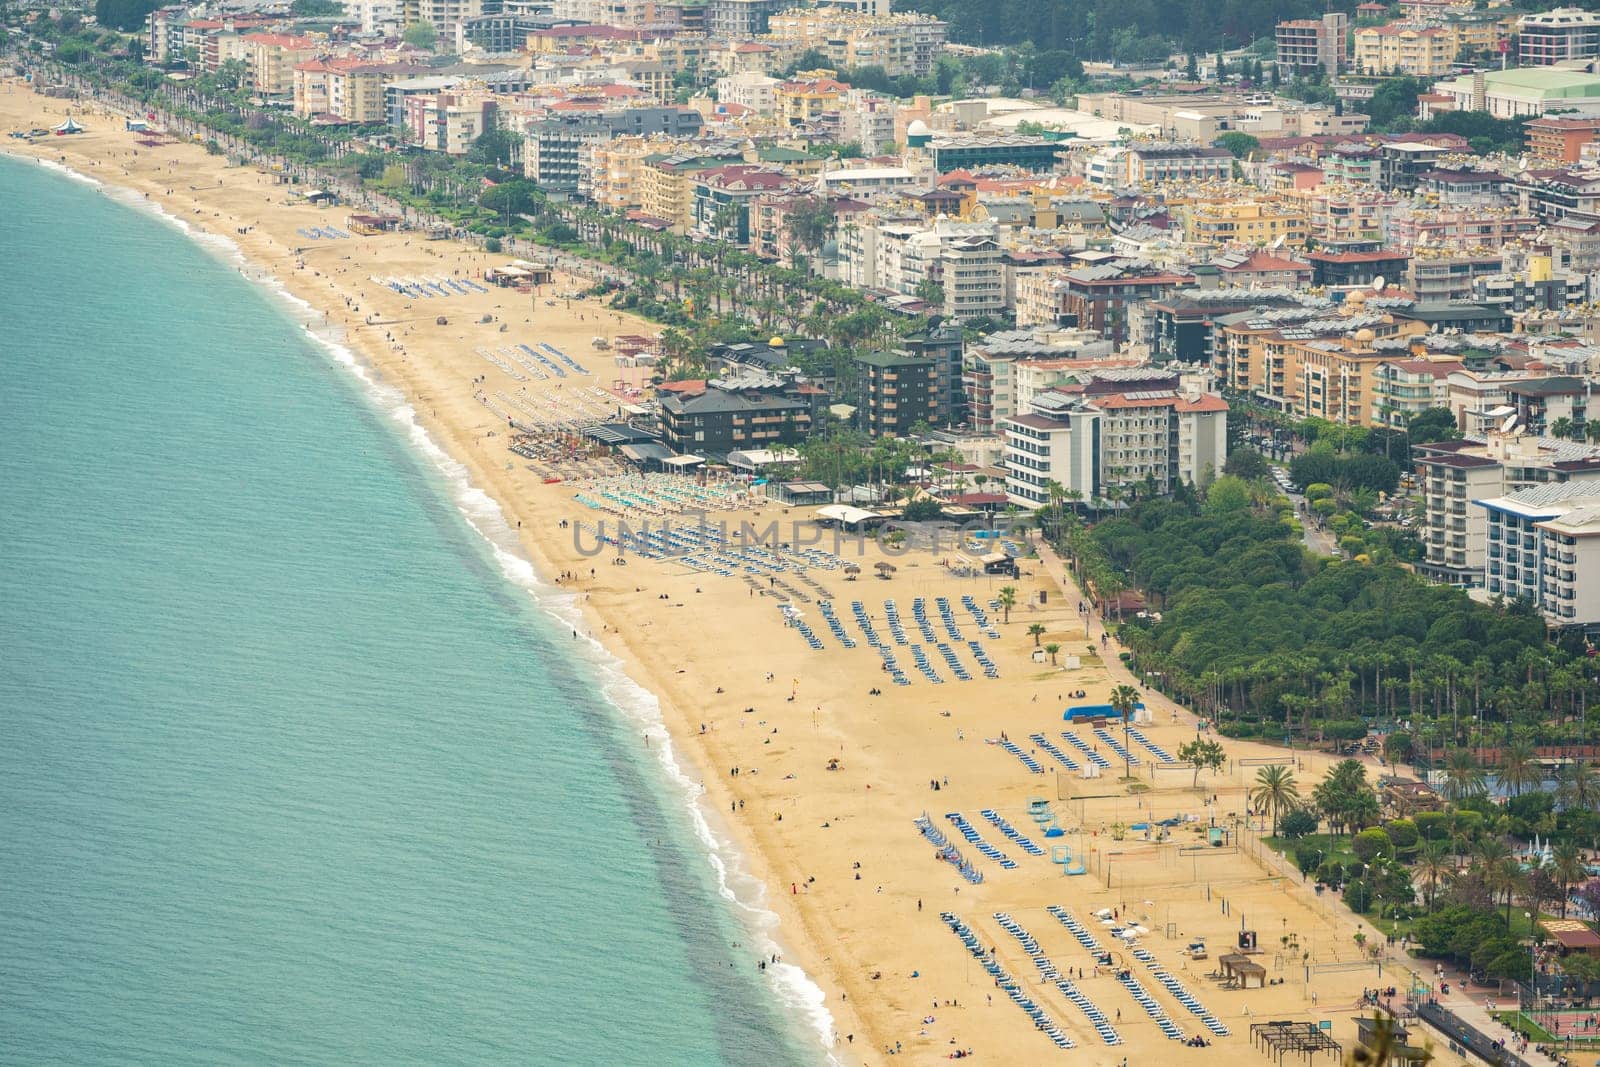 View of Cleopatra beach in Alanya, one of the touristic districts of Antalya, from Alanya Castle